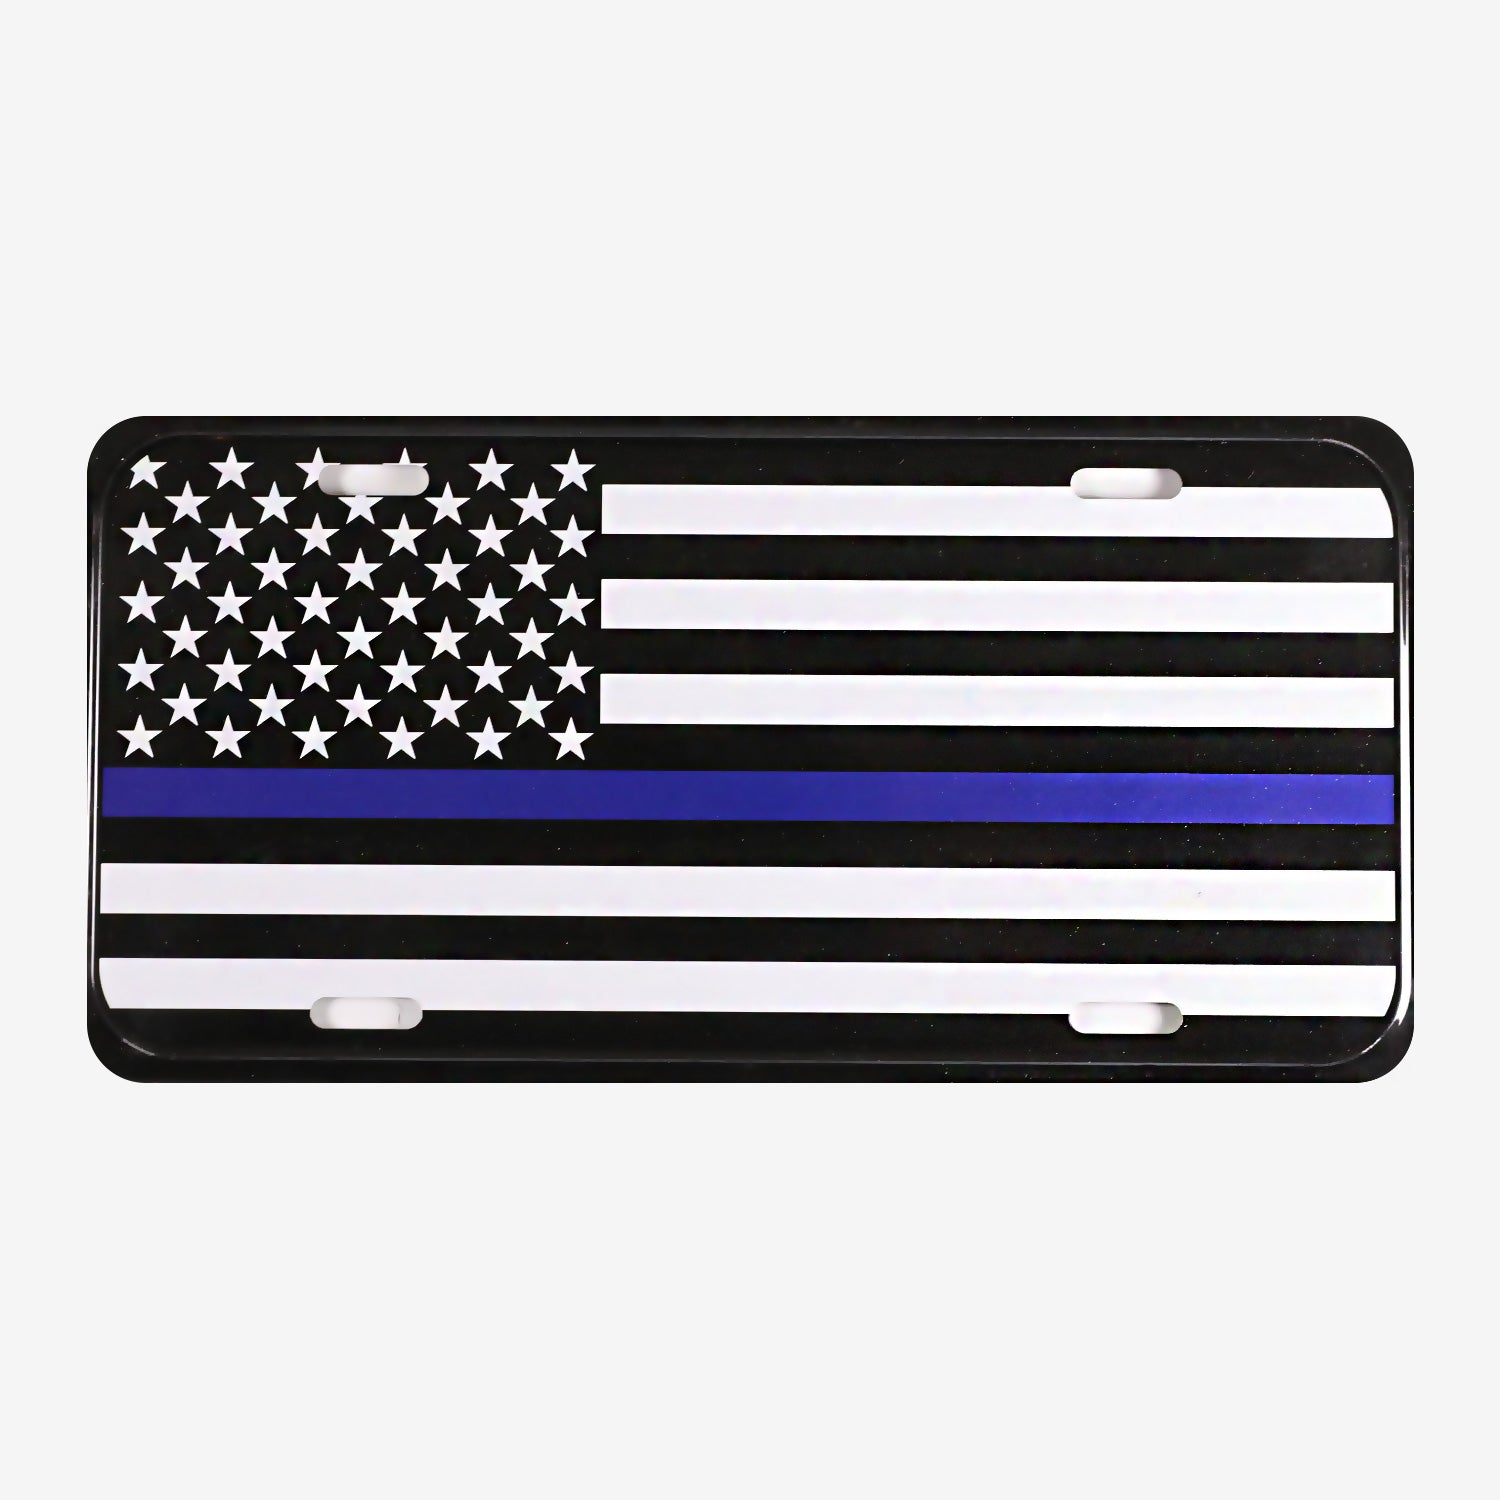 Patriotic Flag Black and Blue License Plate Cover